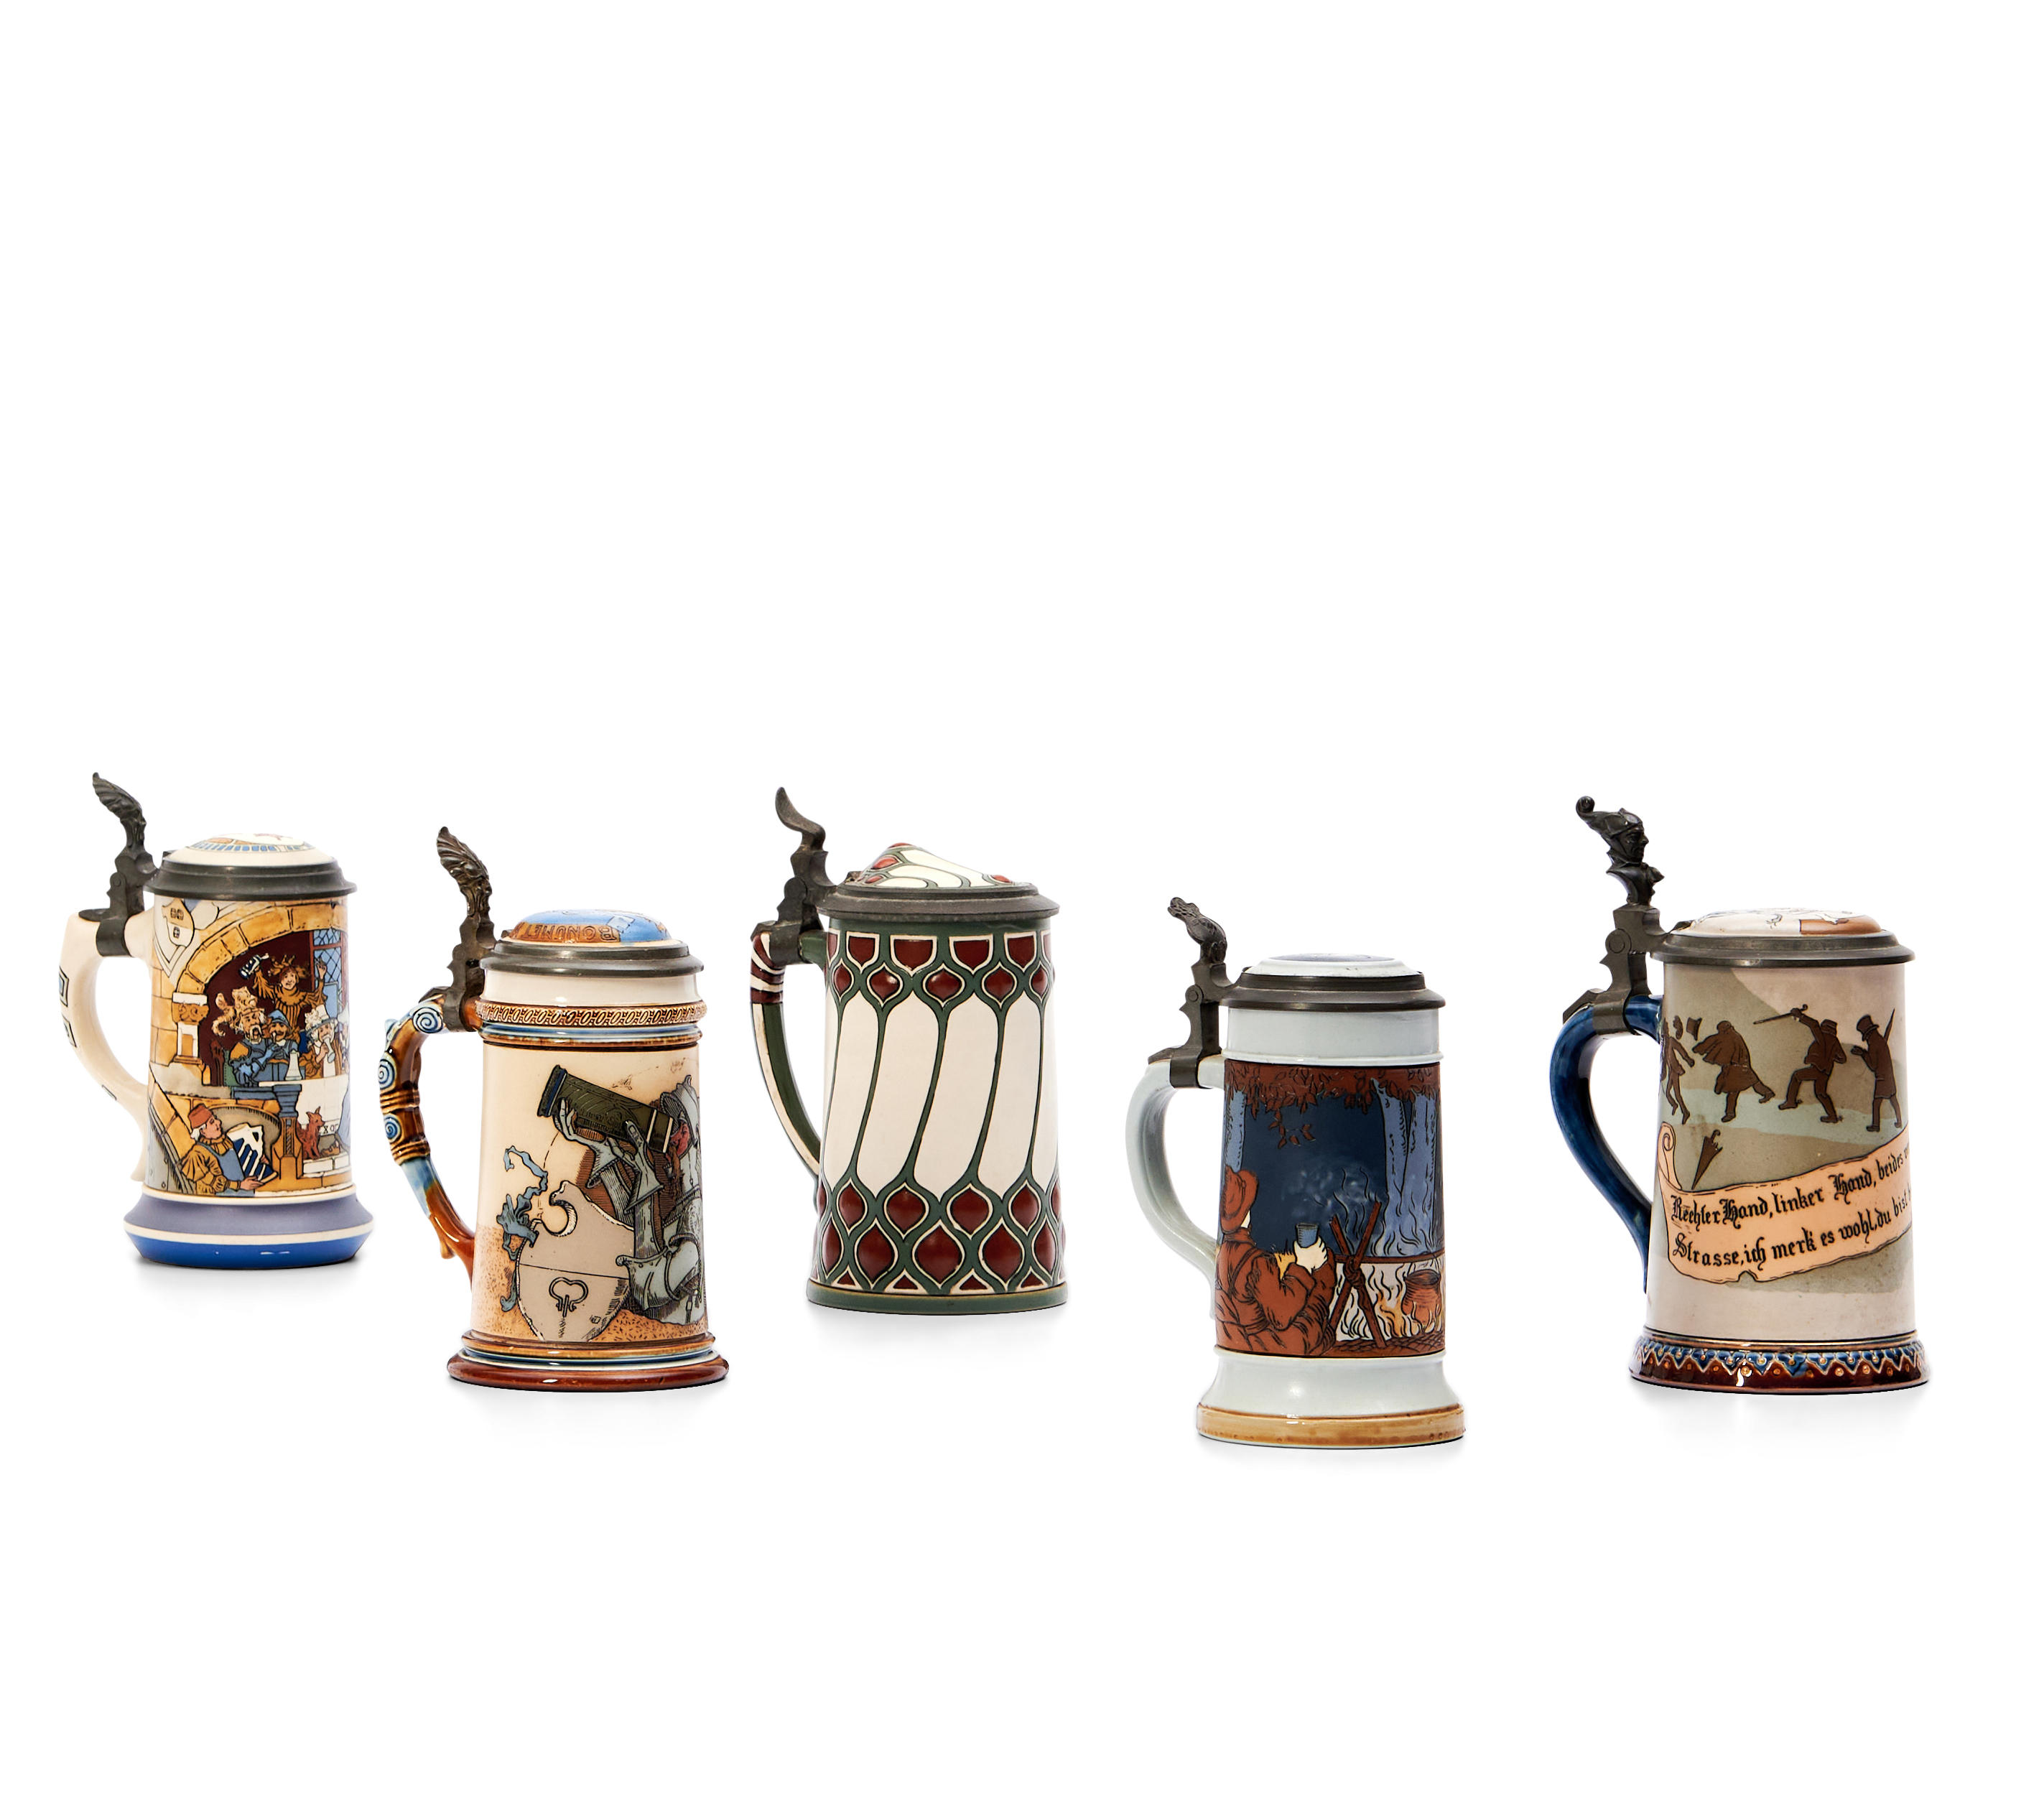 FIVE ETCHED METTLACH STEINS Germany  3aeaba